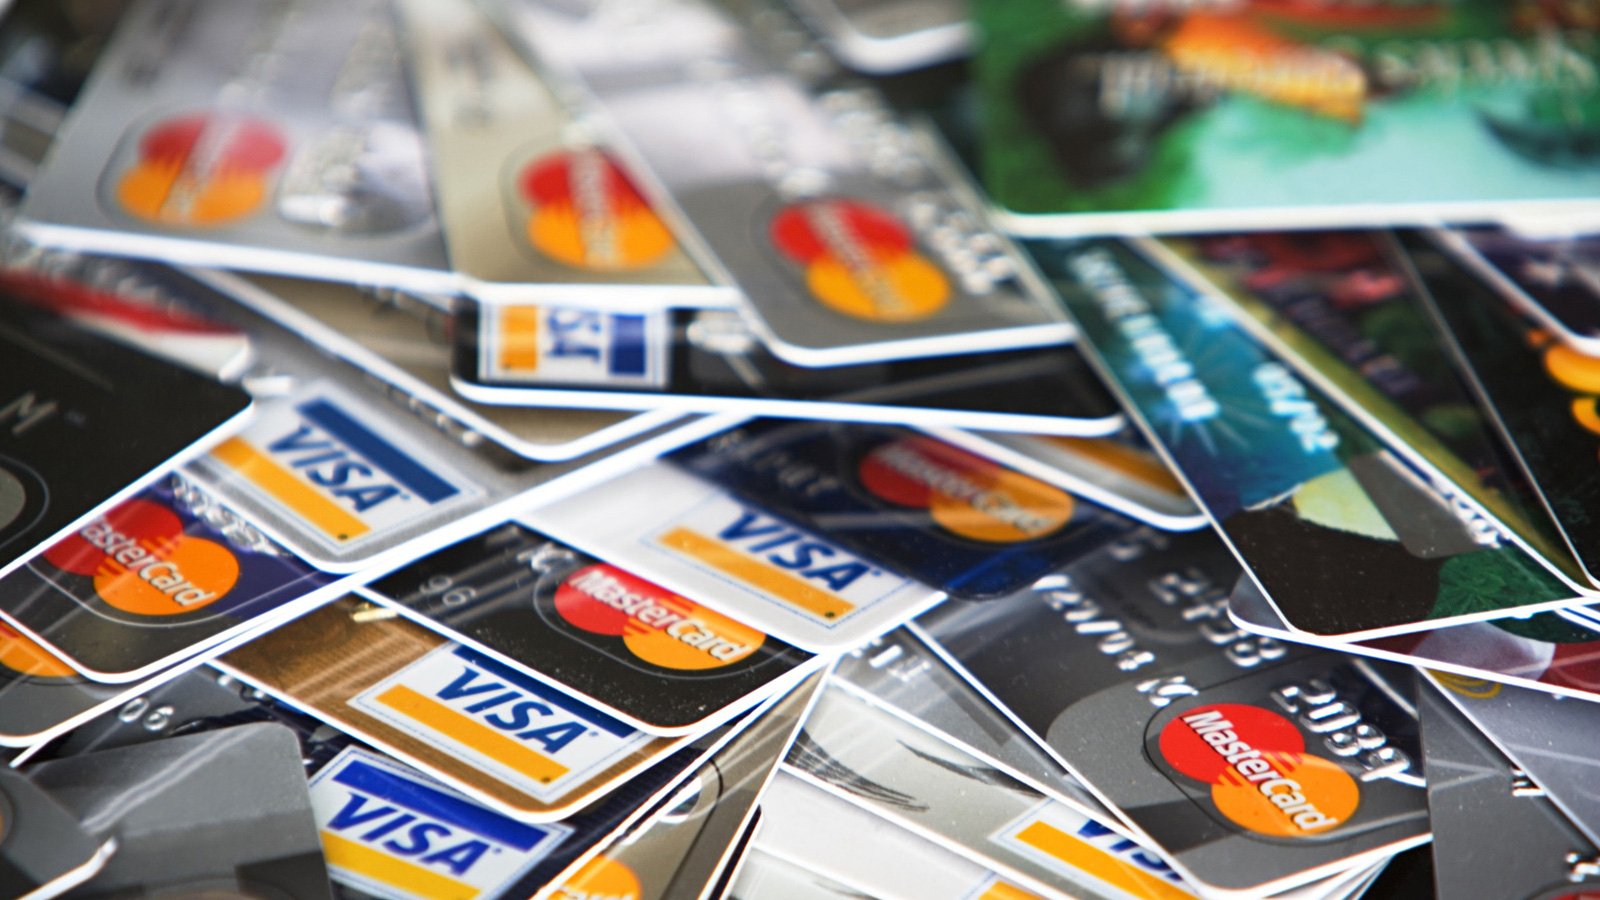 Credit cards, How Hackers Can hijack legit sites